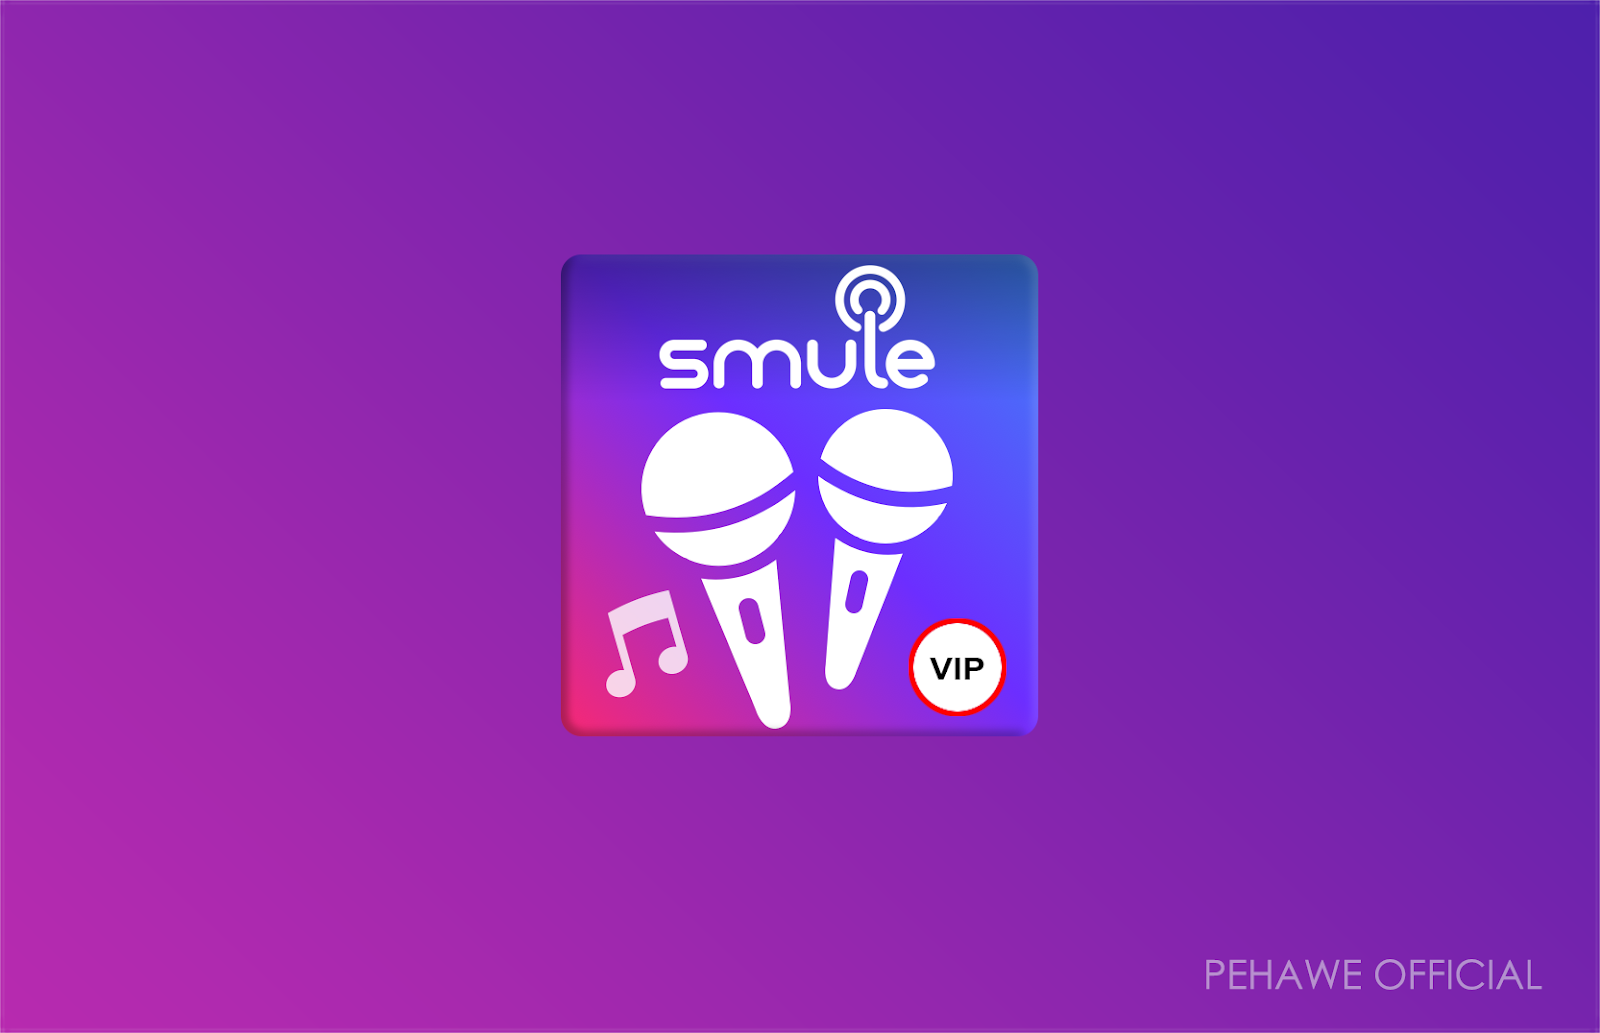 Smule караоке vip. Смуле. Smule VIP. Smule logo. Ыьгеф игра.